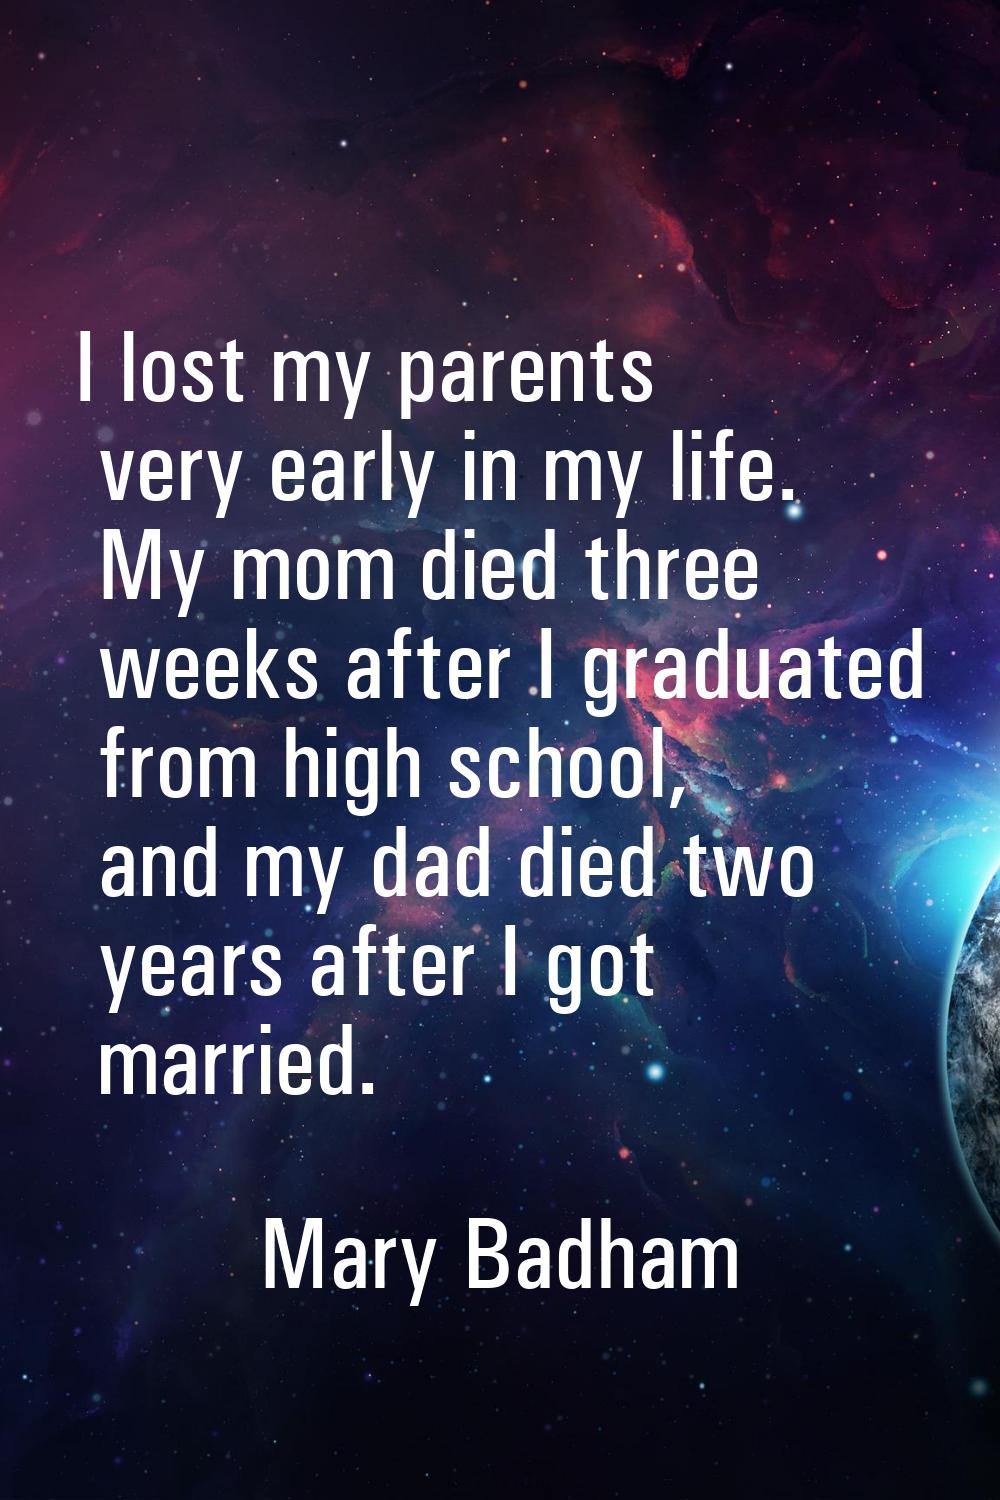 I lost my parents very early in my life. My mom died three weeks after I graduated from high school